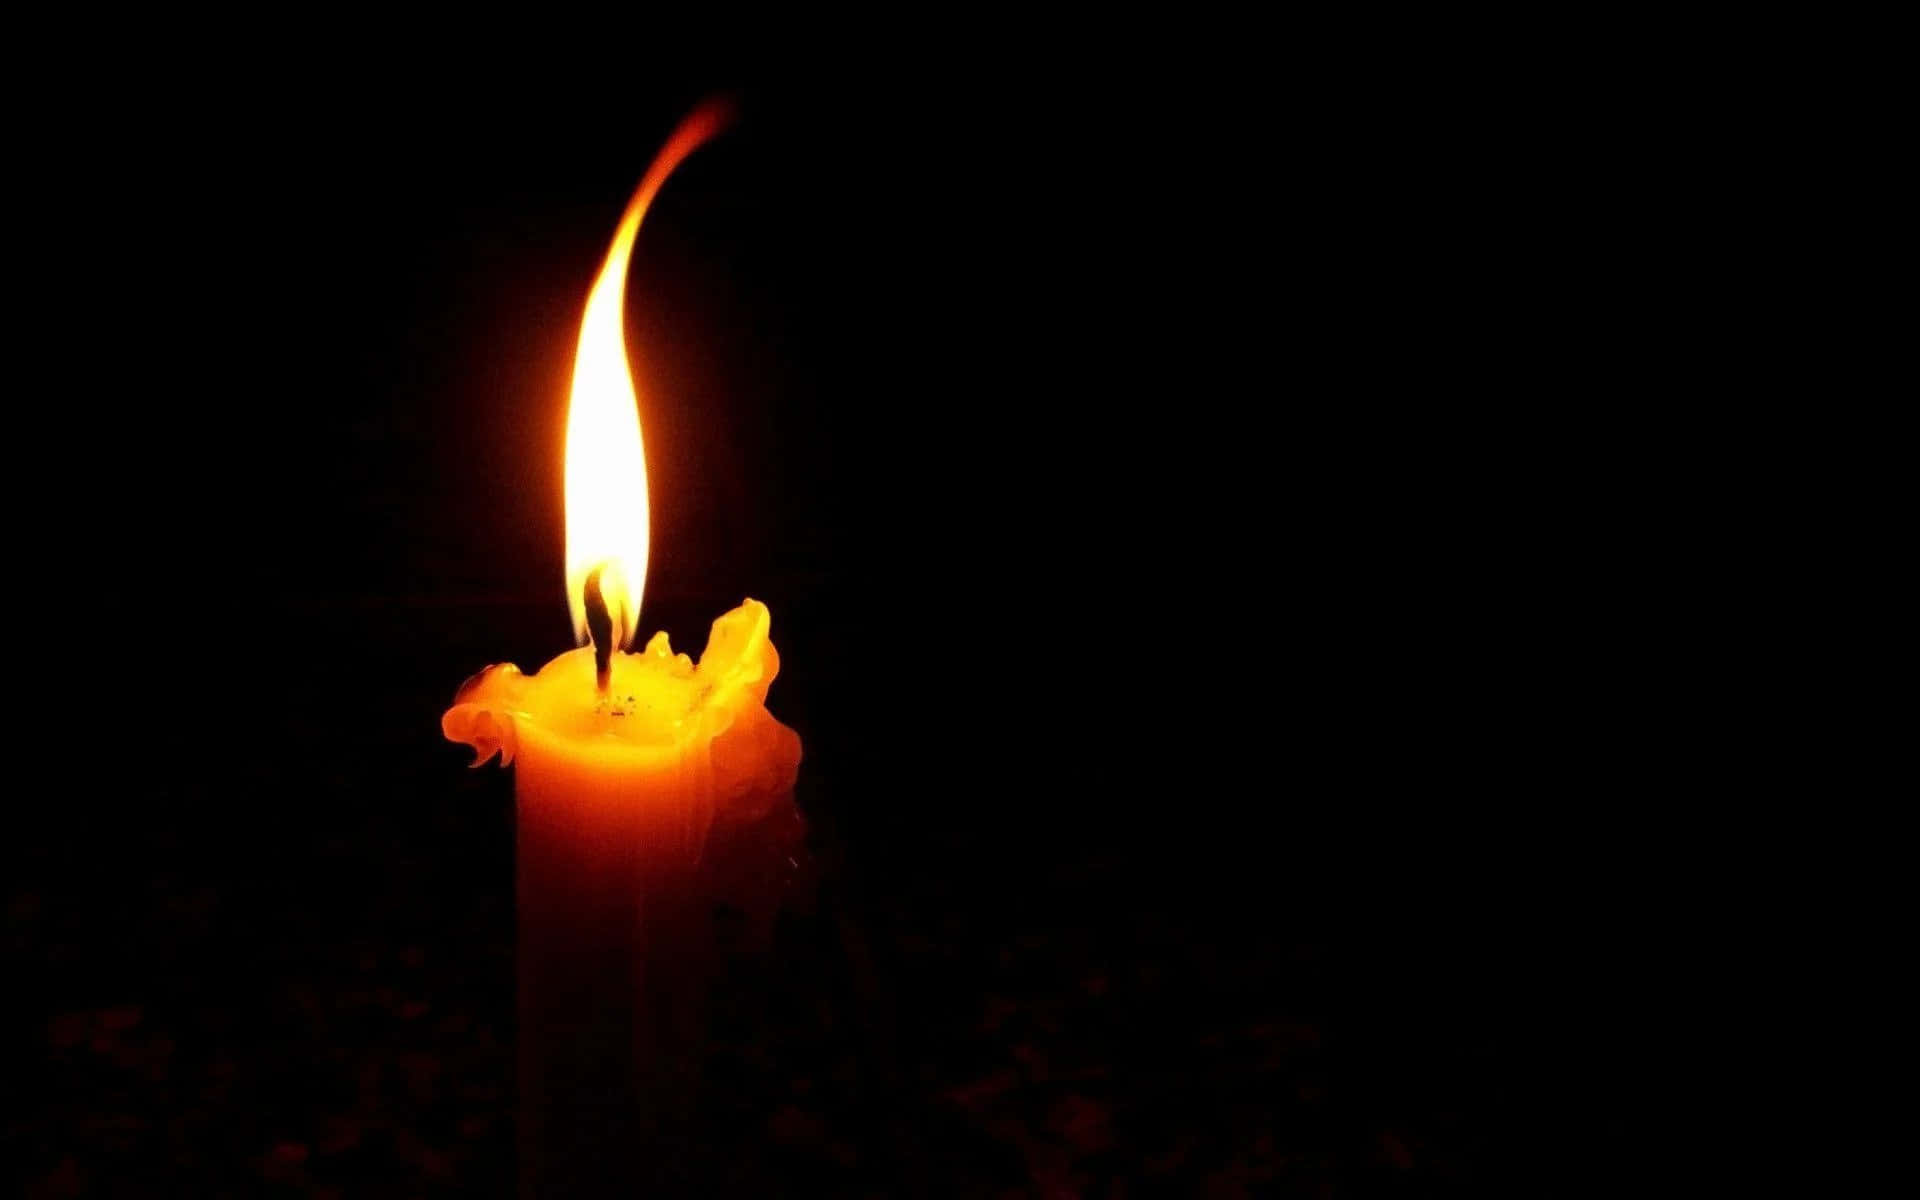 A Candle Lit In The Dark